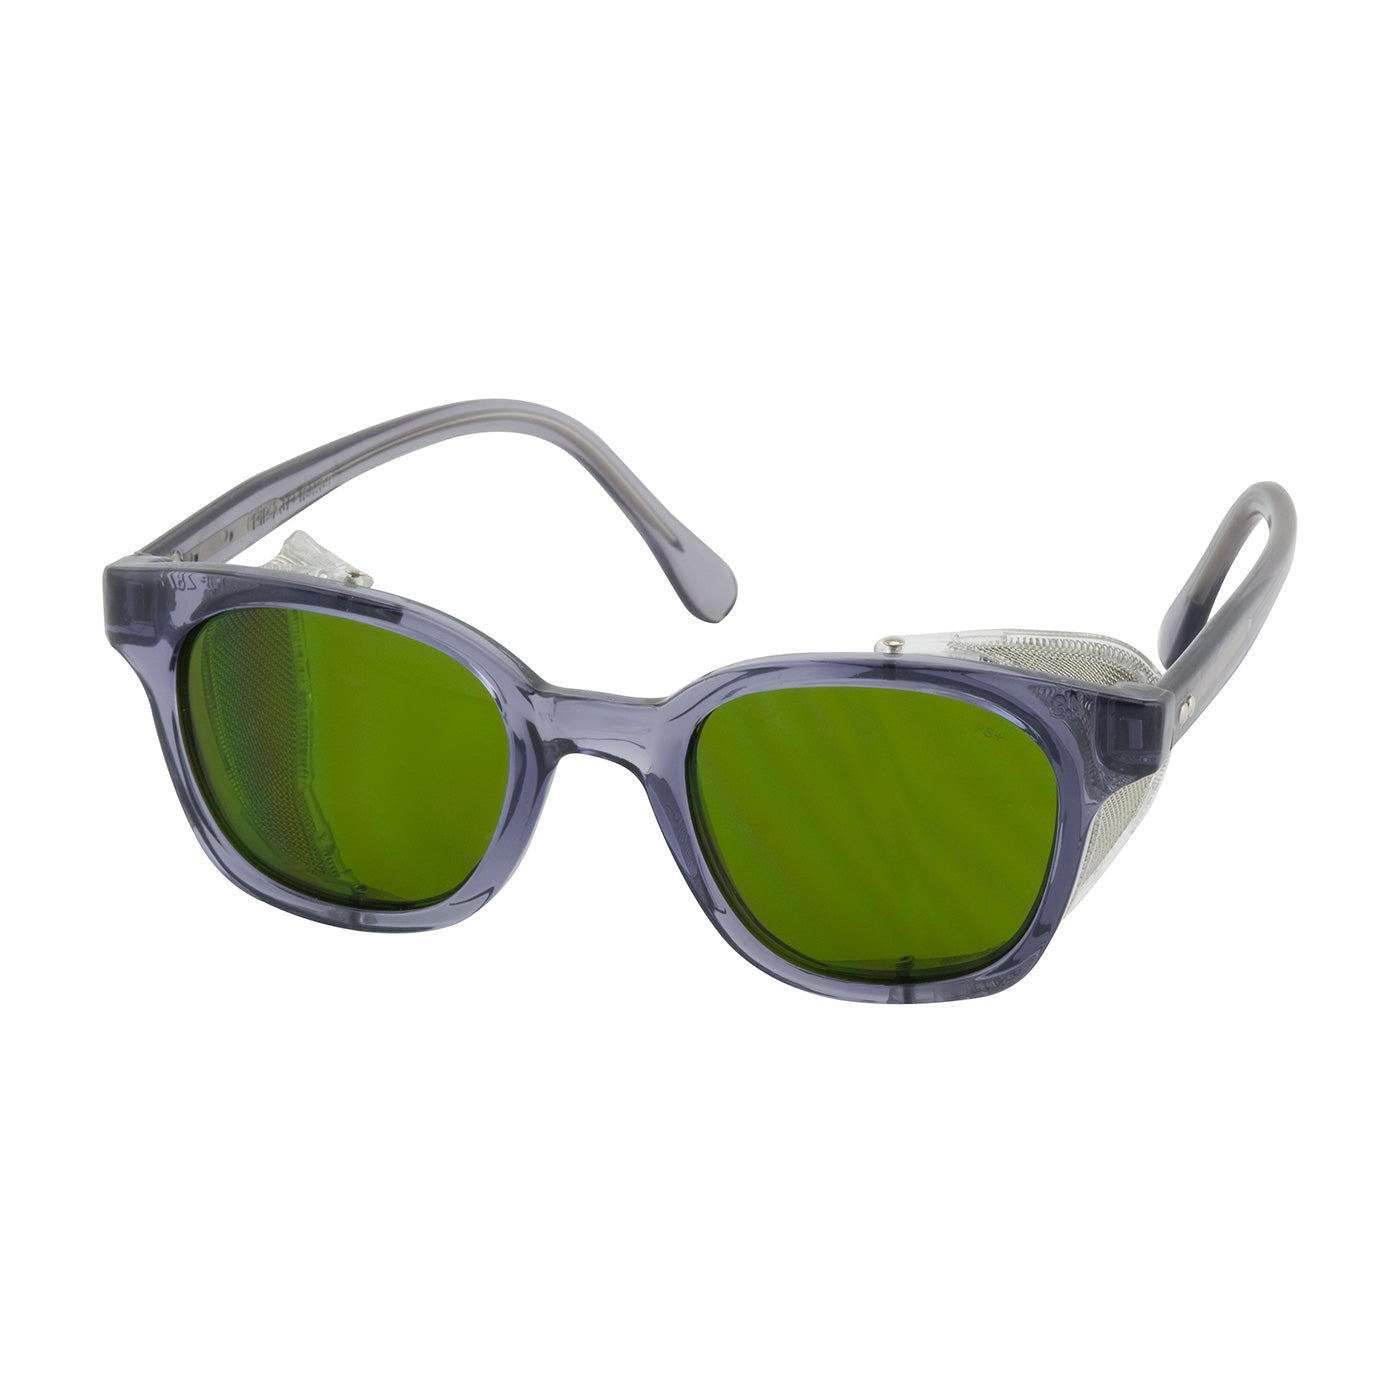 Bouton 249-5907-207 5900 Traditional Safety Glasses - Smoke Frame - Green IR 3.0 Lens-eSafety Supplies, Inc